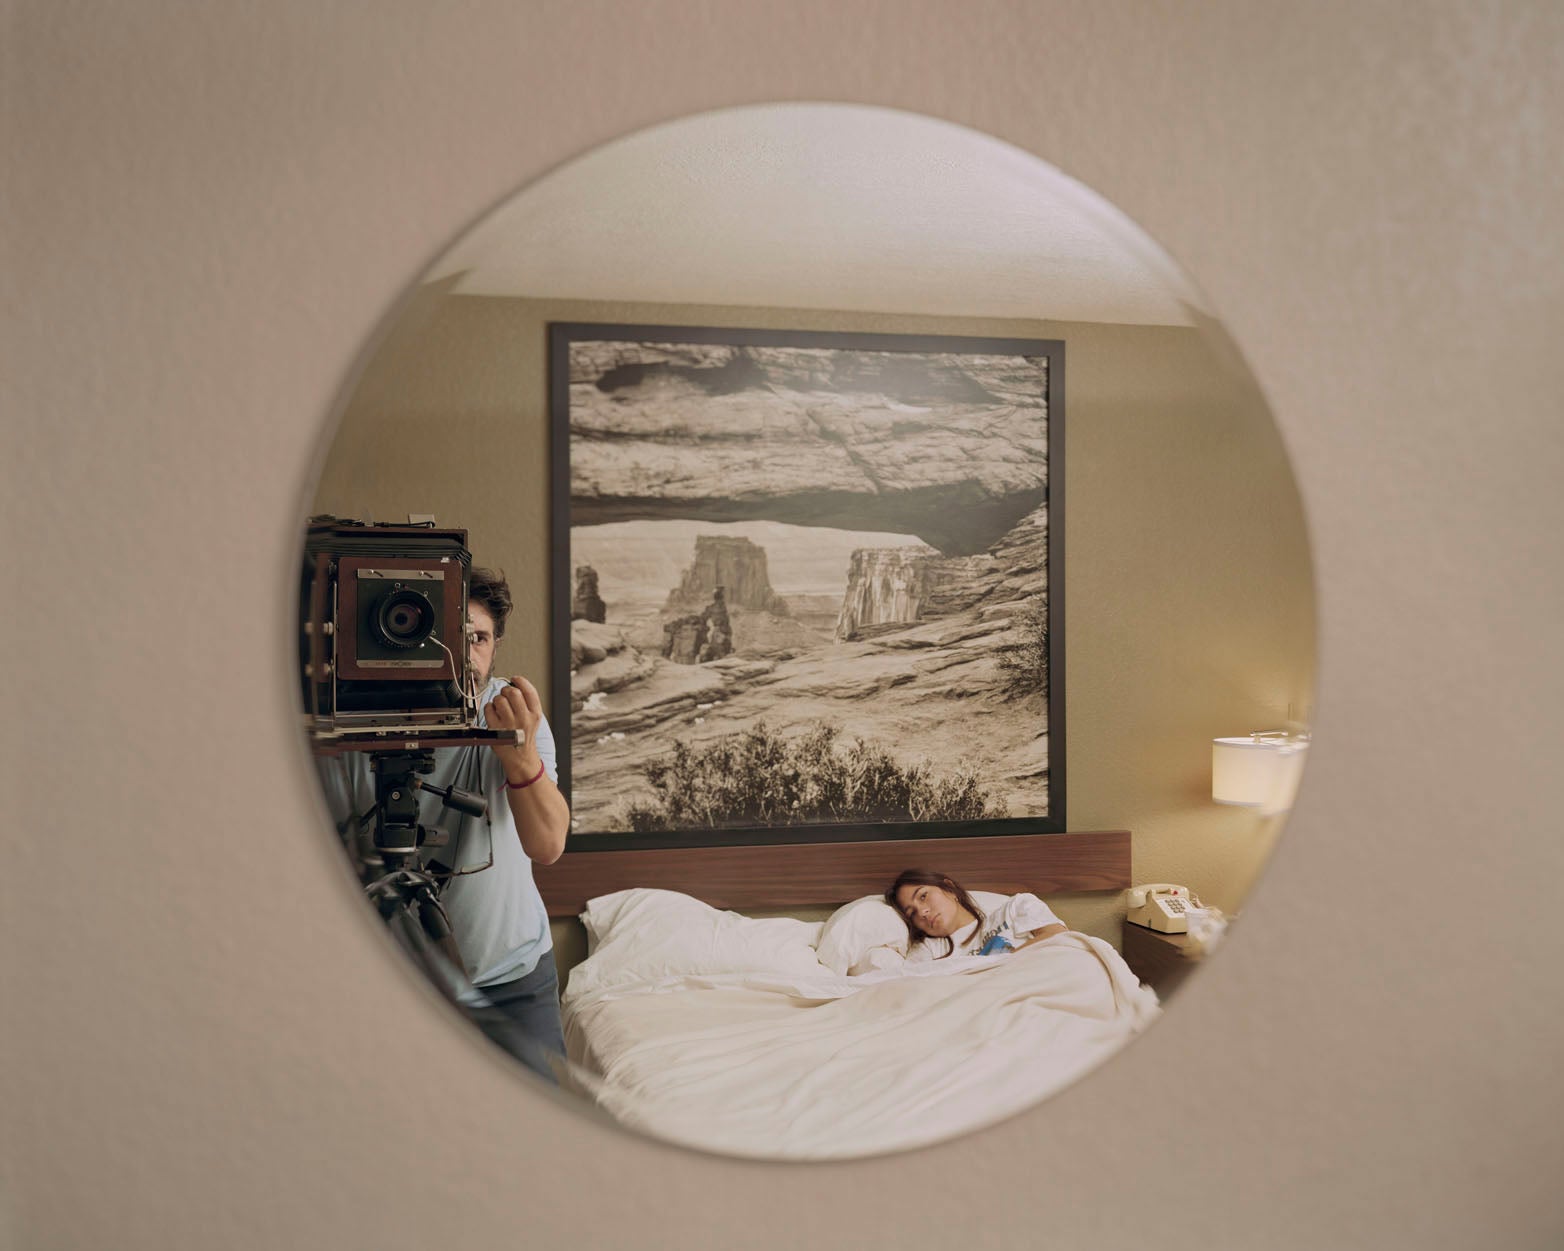 A film photograph of the photographer's reflection, captured in a circular mirror on the wall.